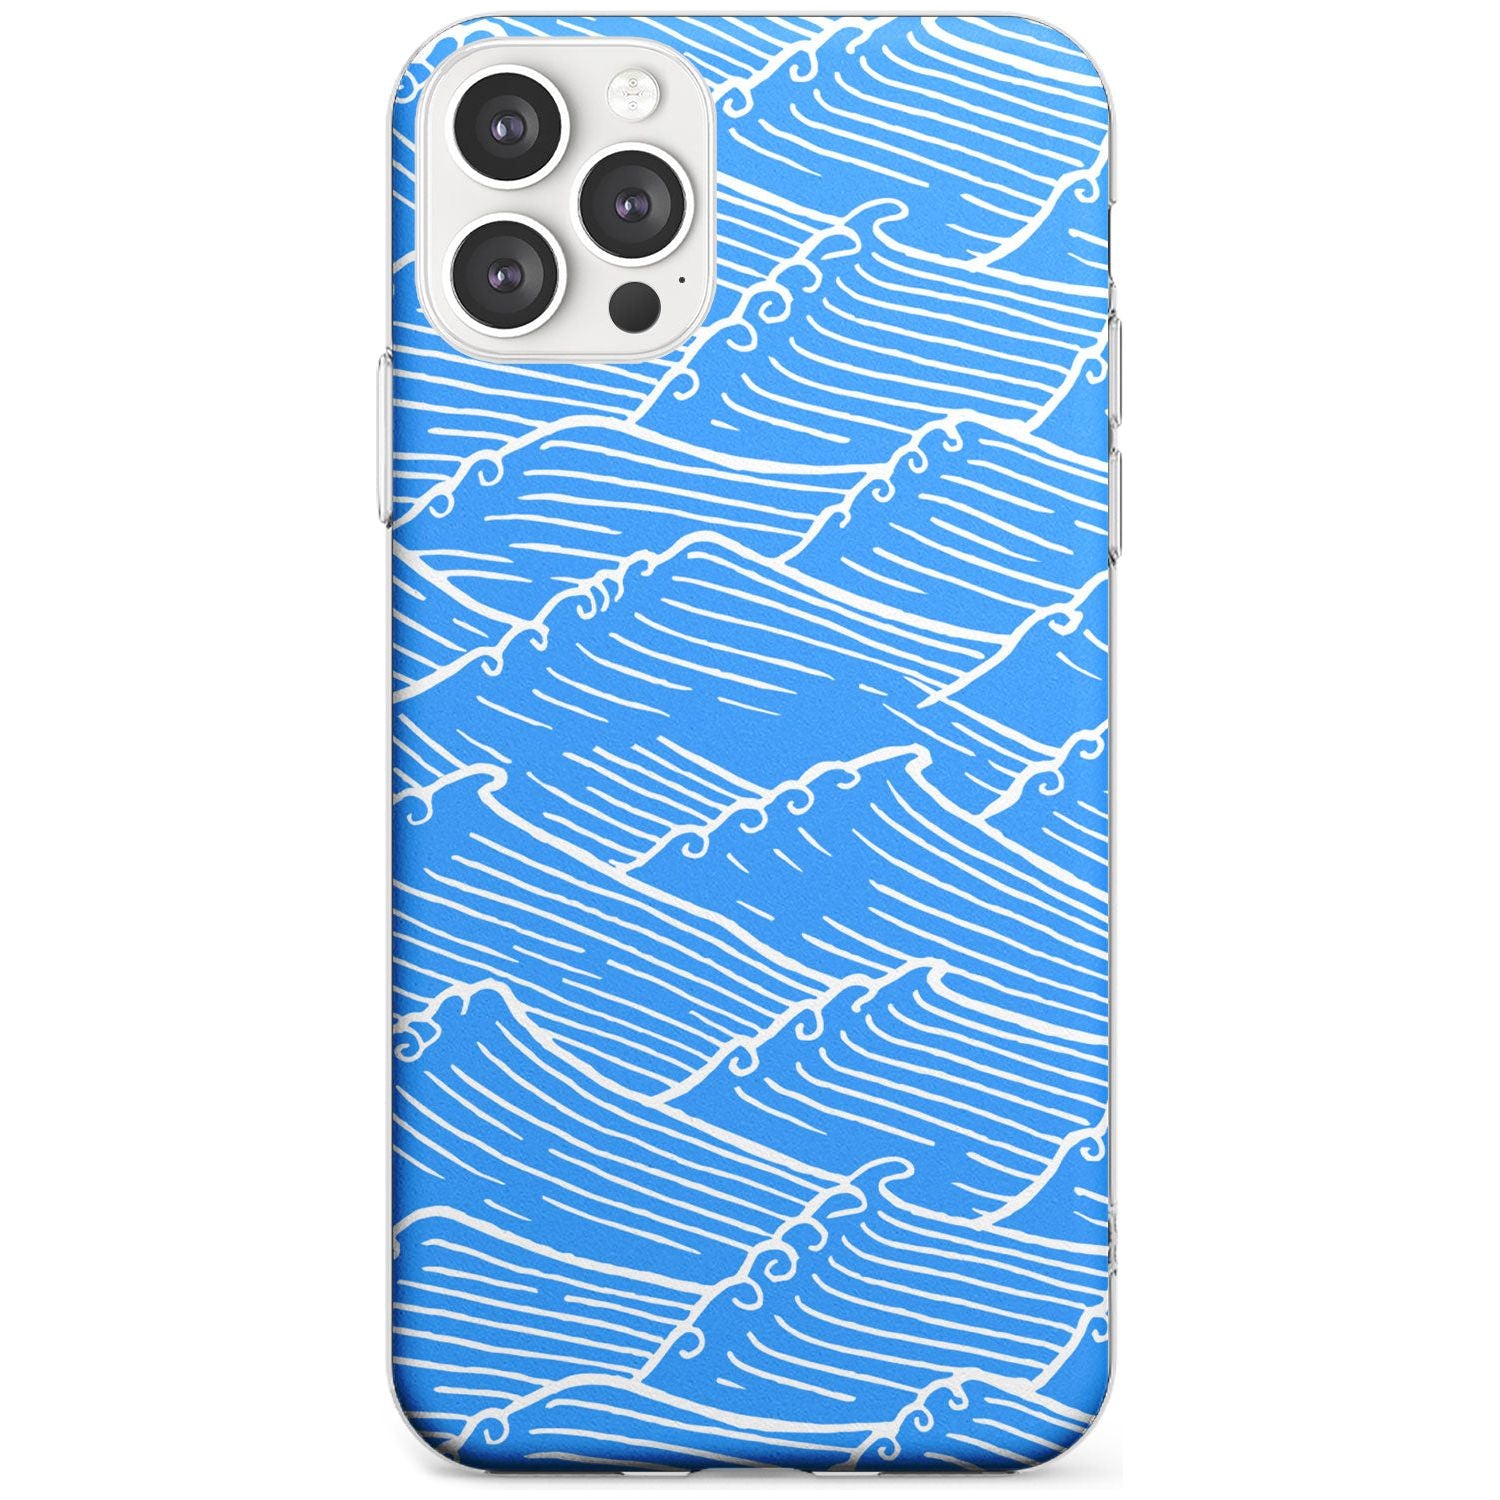 Waves Pattern Slim TPU Phone Case for iPhone 11 Pro Max